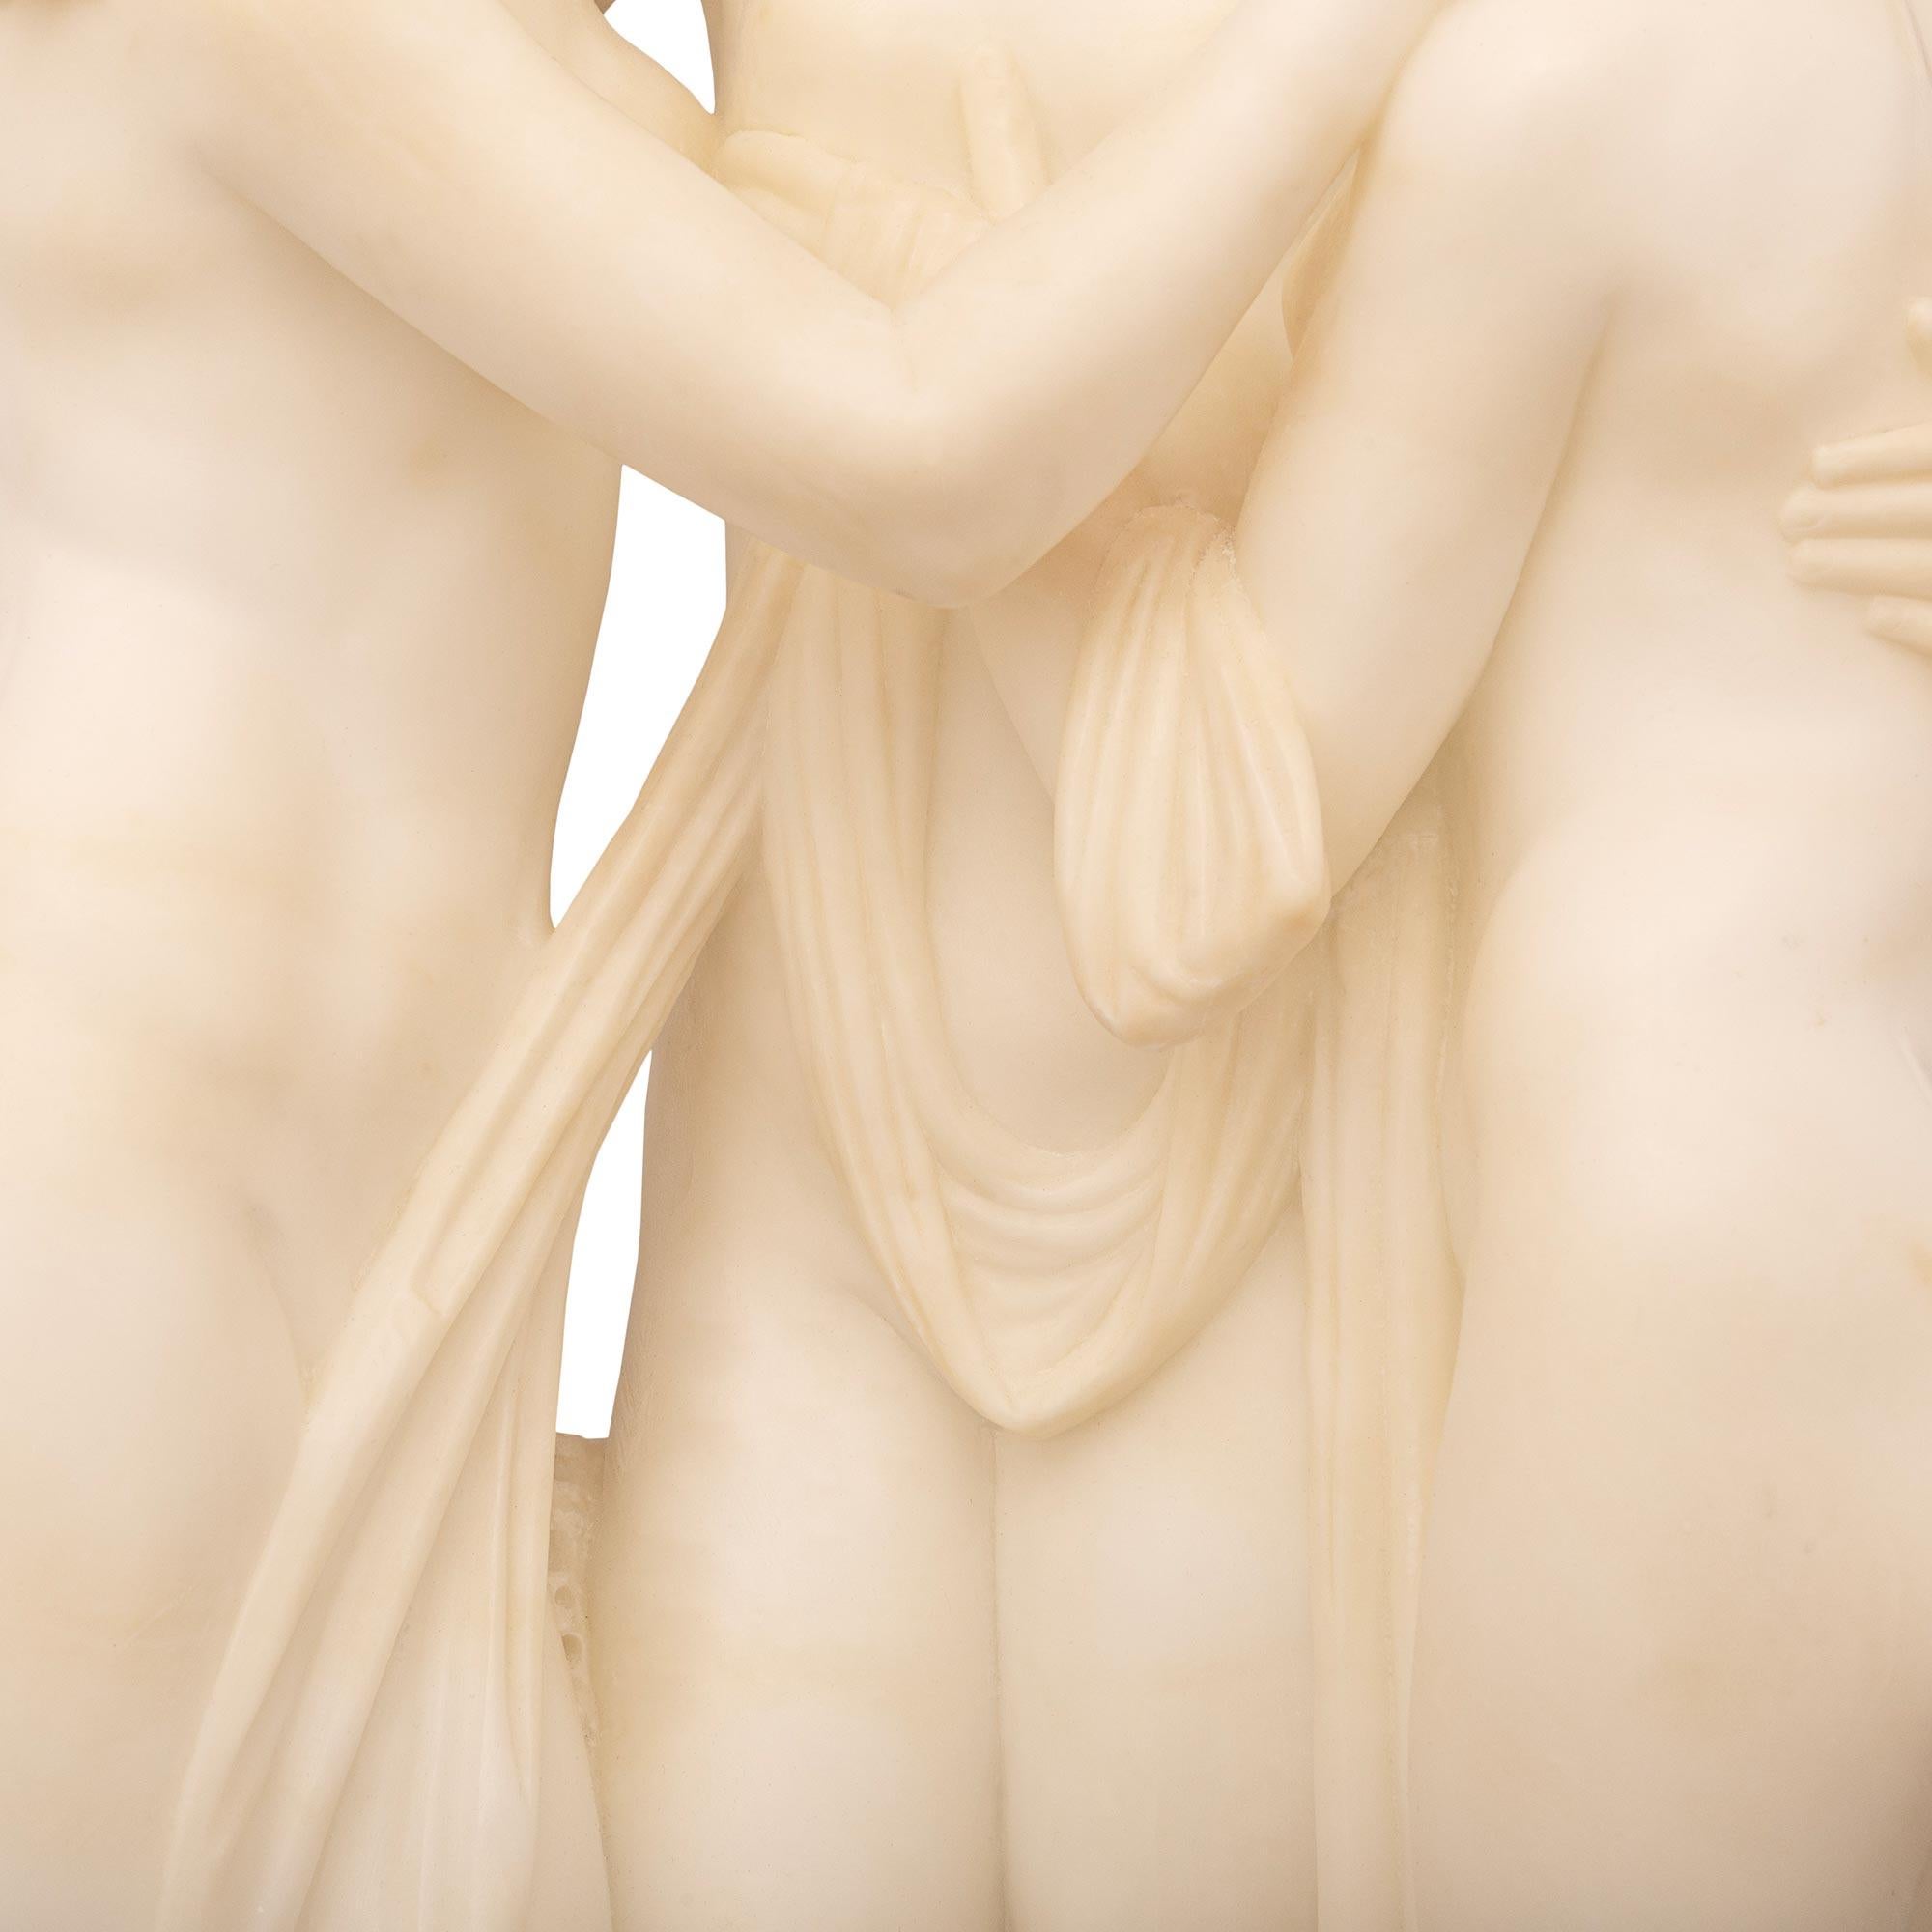 Italian 19th century Neo-Classical st. Alabaster statue of The Three Graces For Sale 3